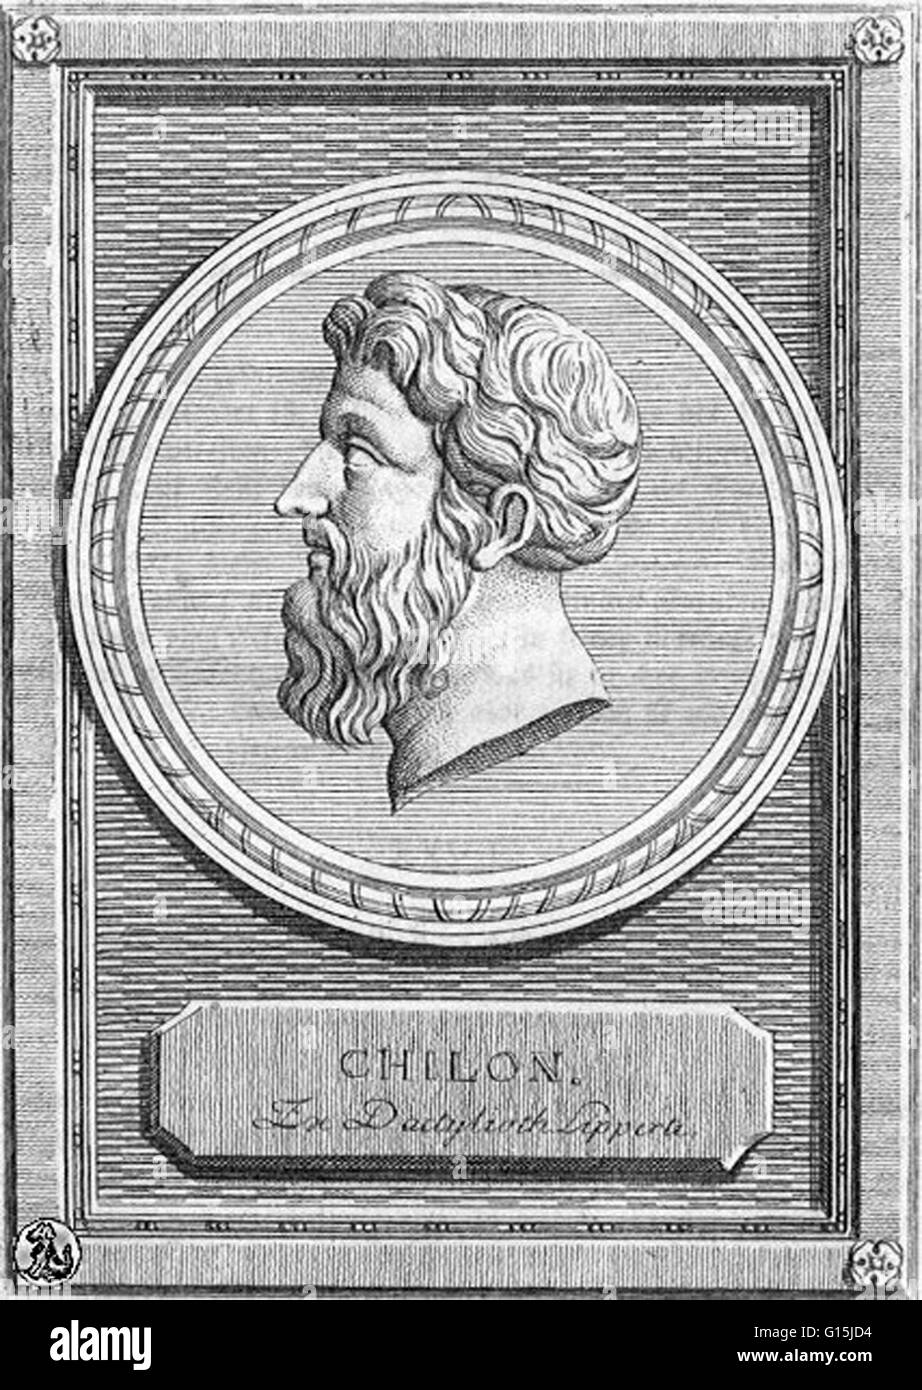 Chilon of Sparta (6th century BC) was a Lacedaemonian and one of the Seven Sages of Greece. He was a famous legislator and reformer from Athens, framing the laws shaped the Athenian democracy. Chilon is said to have helped to overthrow the tyranny at Sicy Stock Photo